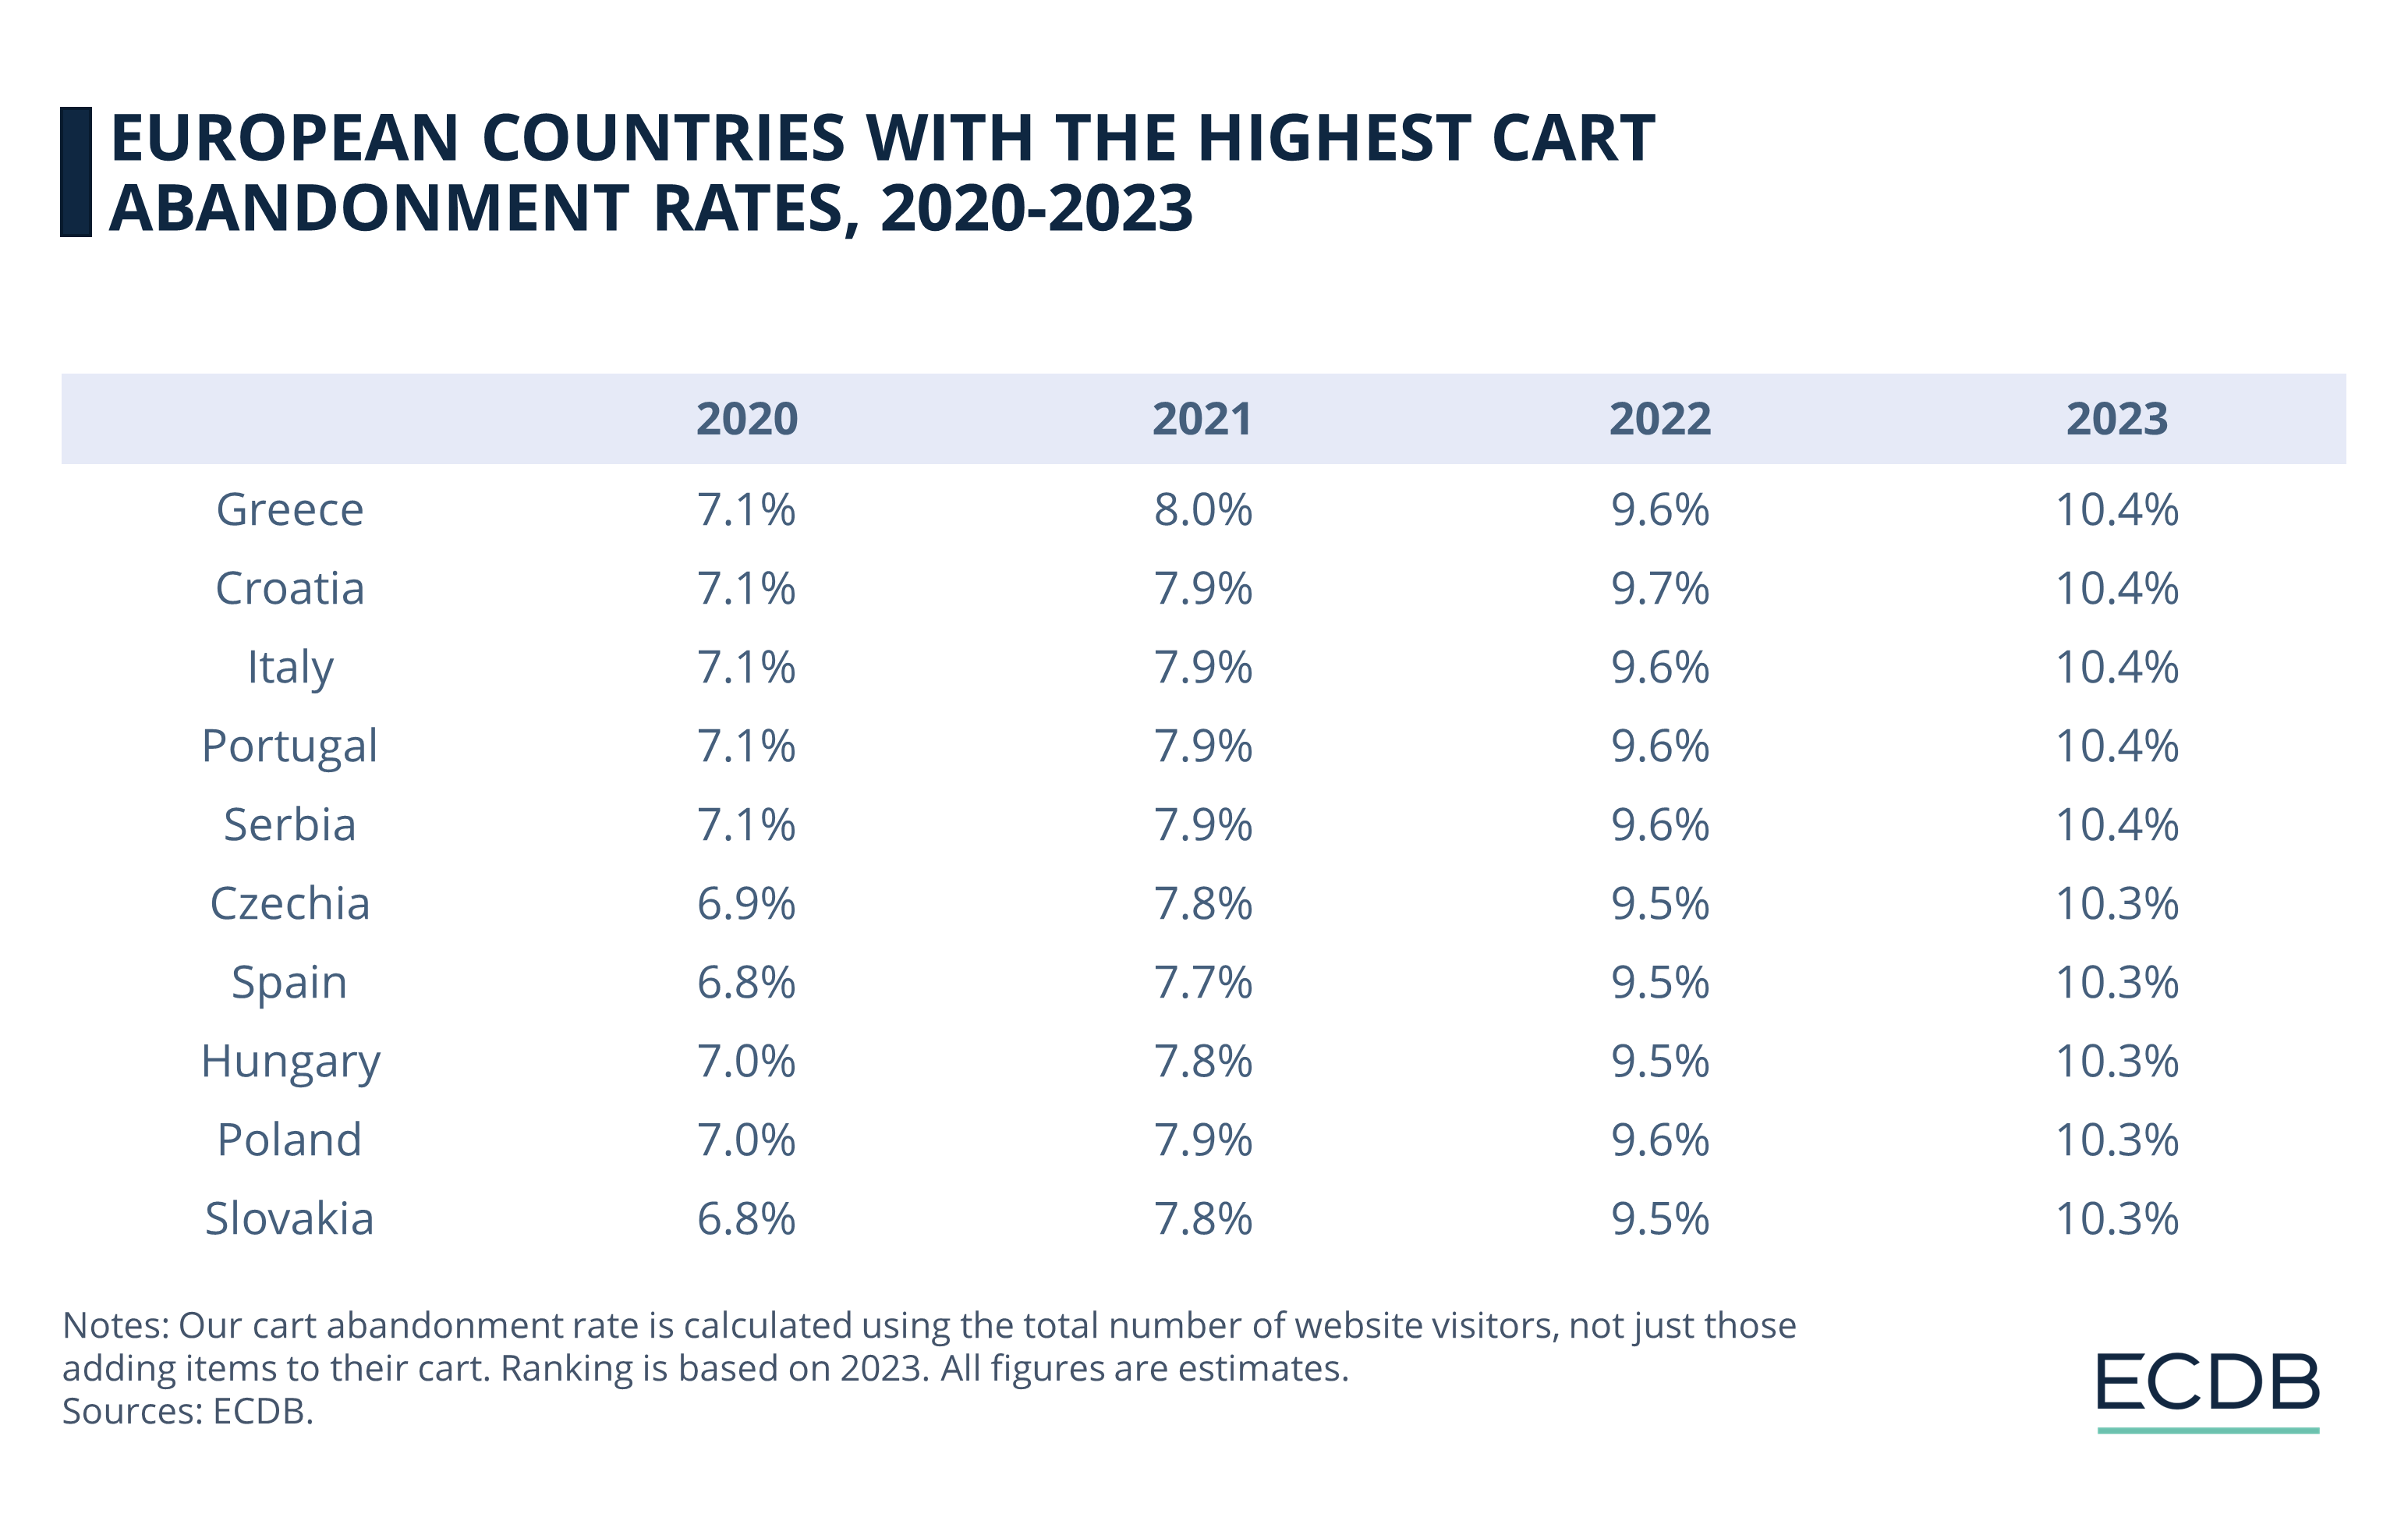 European Countries with the Highest Cart Abandonment Rates, 2020-2023